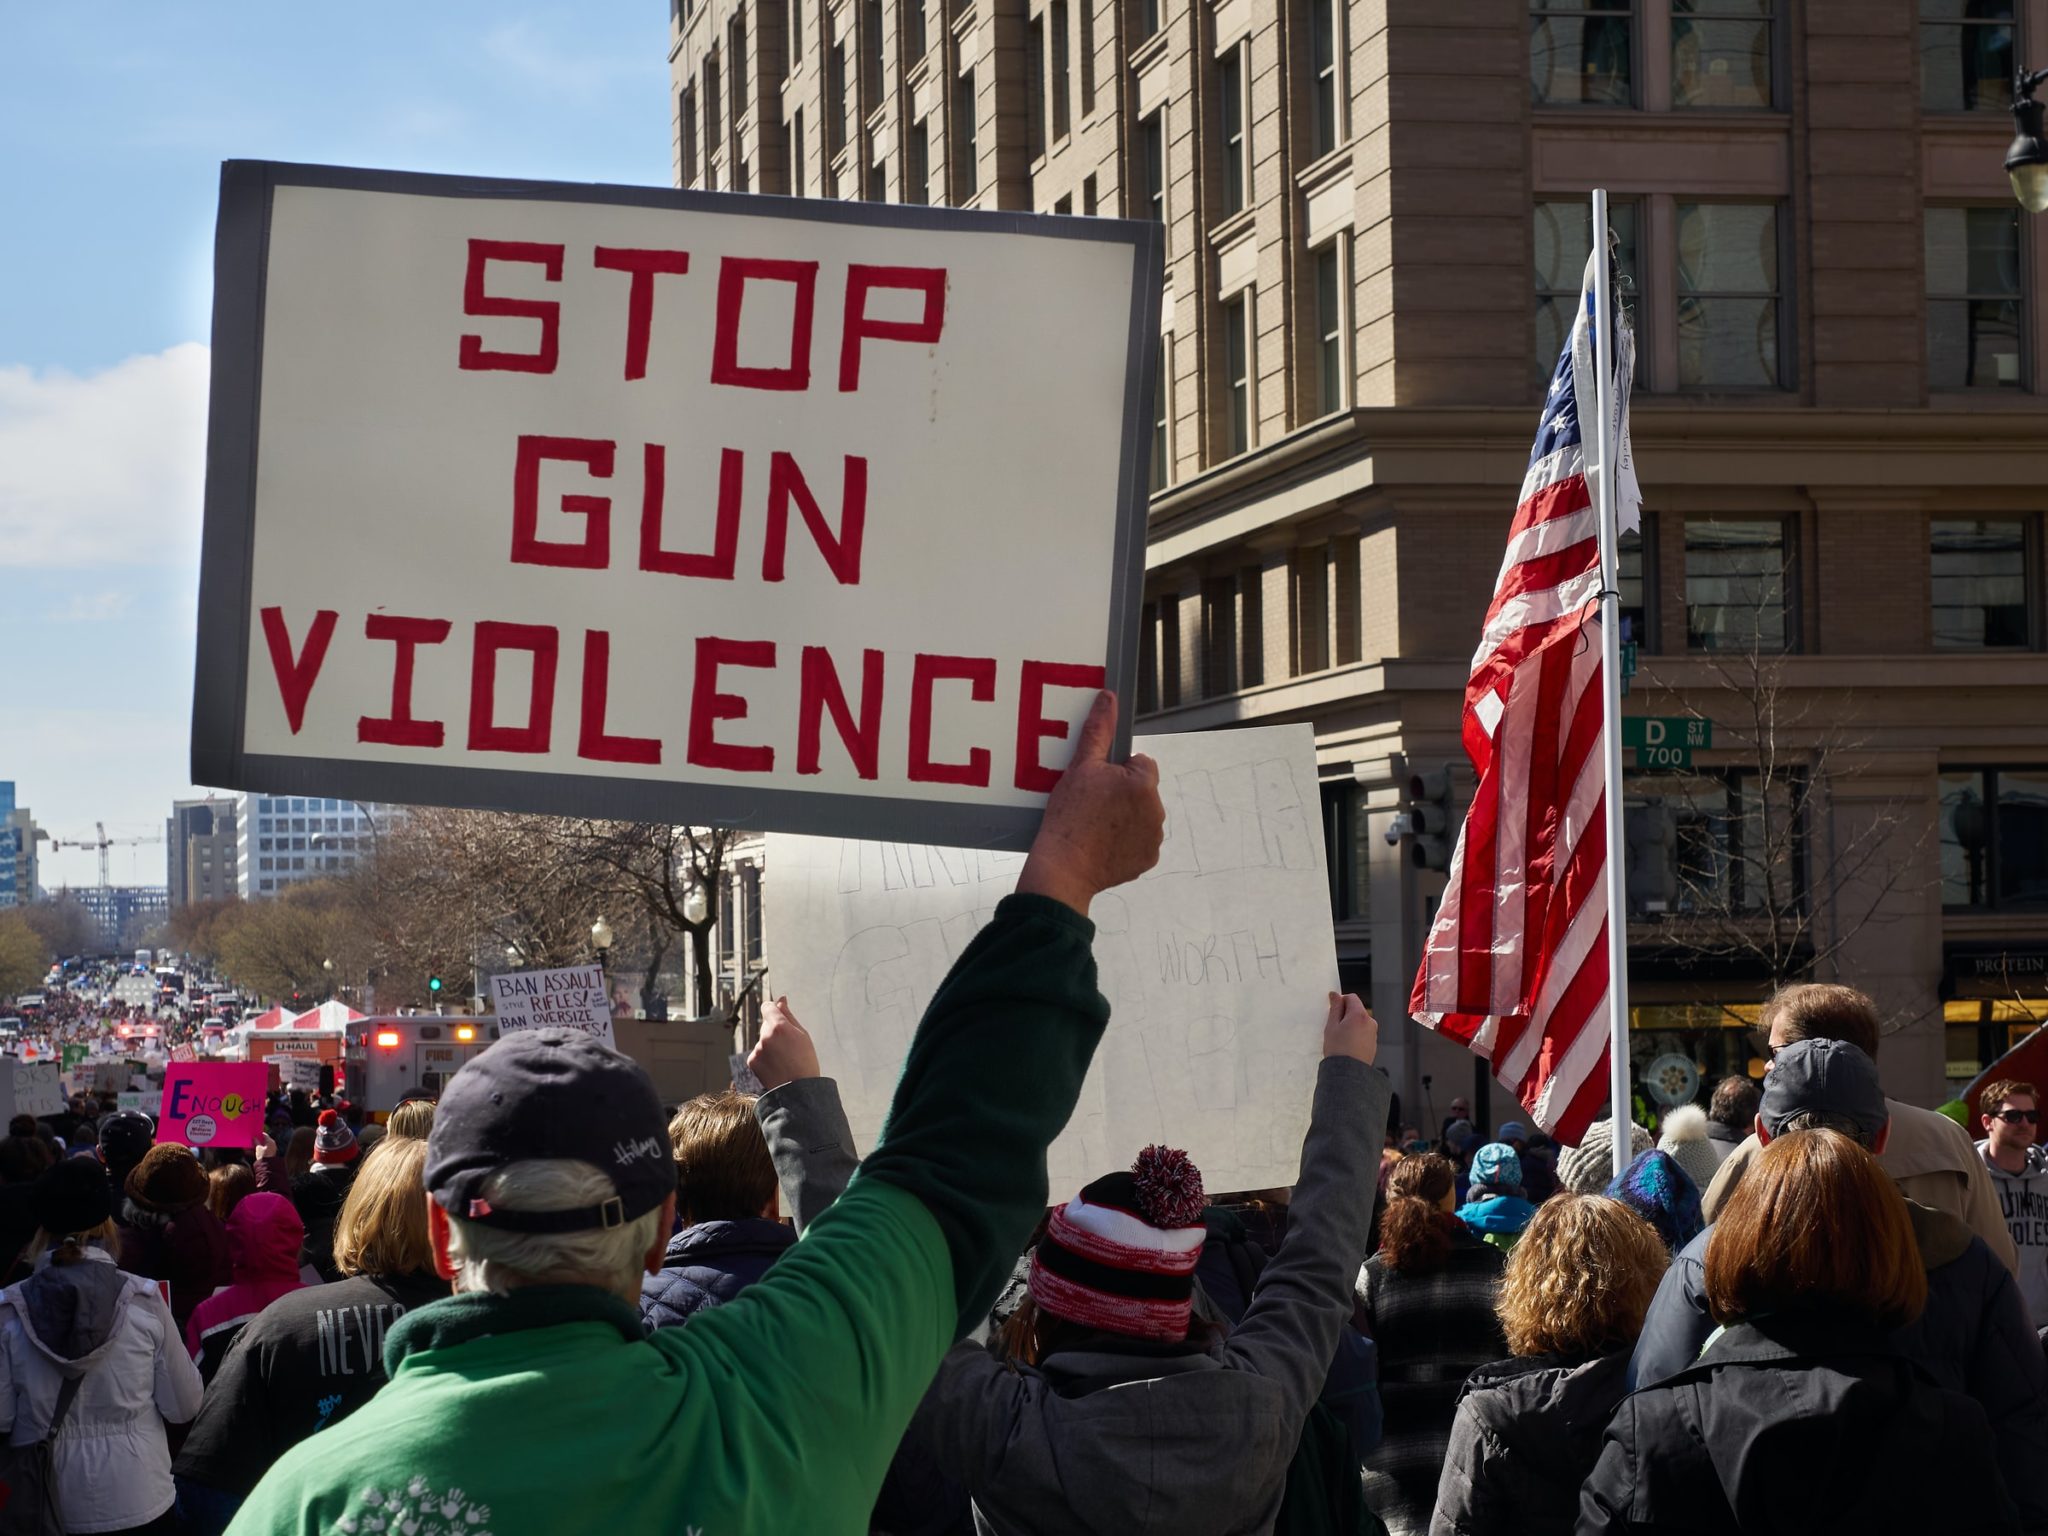 Crowds of protestors in the street. One holds a sign that says "Stop Gun Violence." Another holds an American flag.